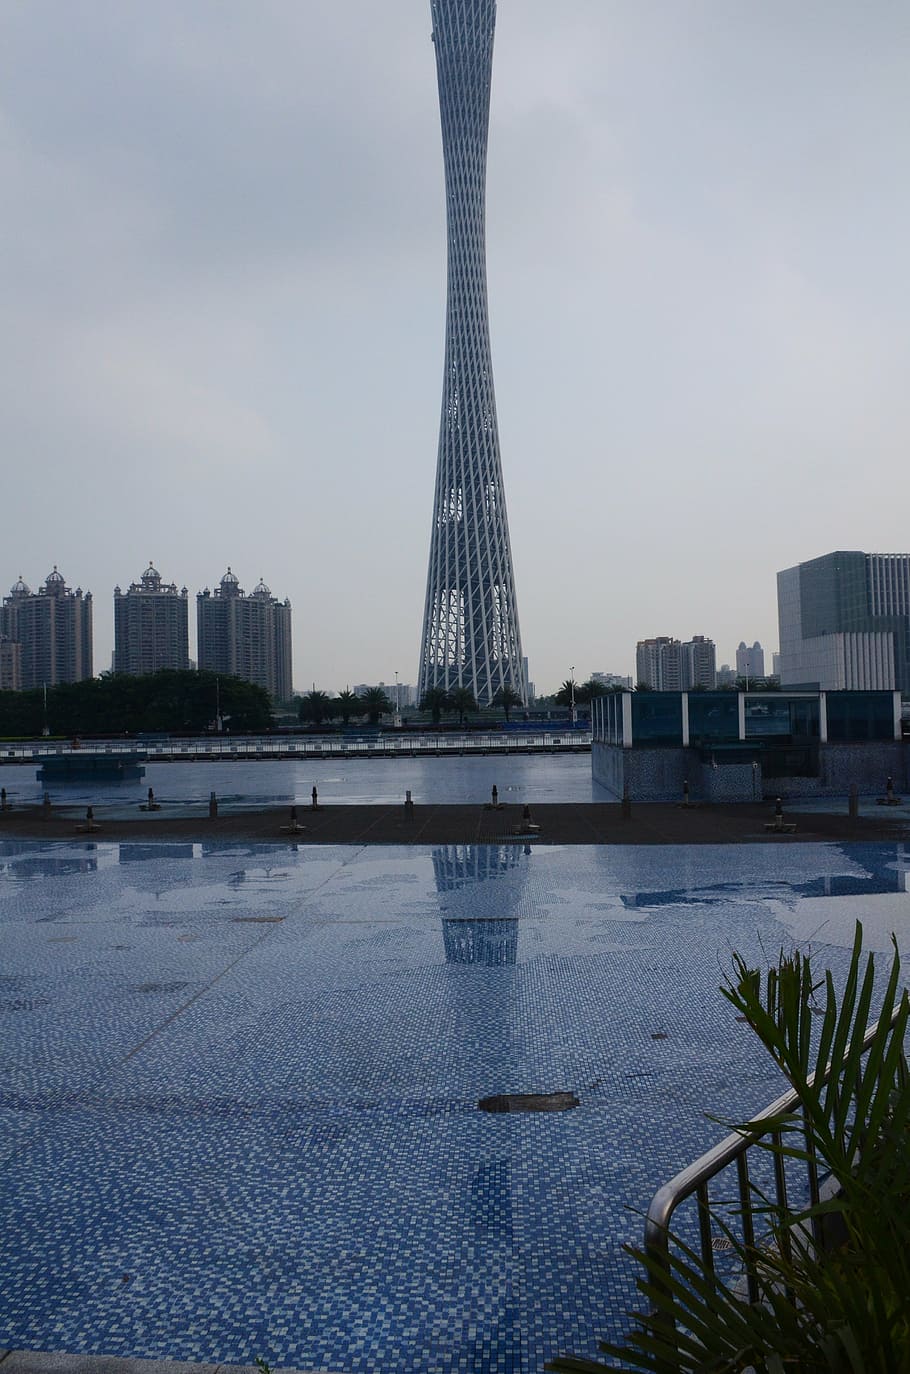 canton, tower telecom, building, built structure, architecture, sky, building exterior, city, water, tall - high